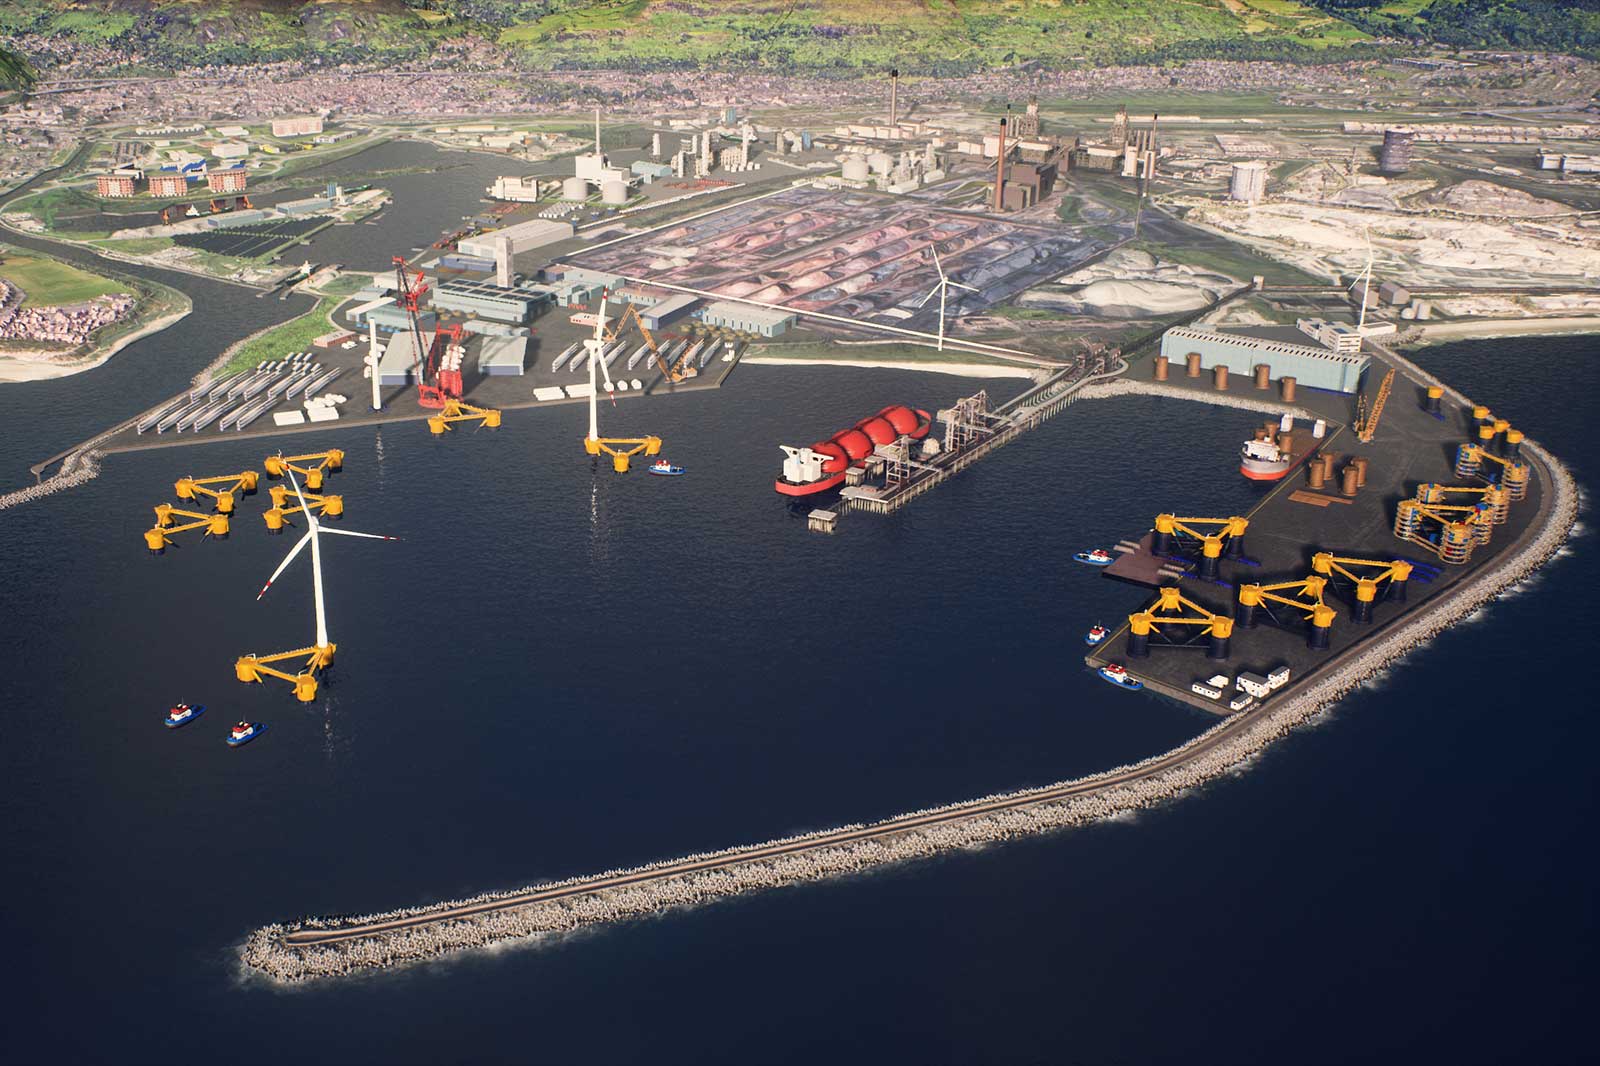 RWE’s vision for the Celtic Sea